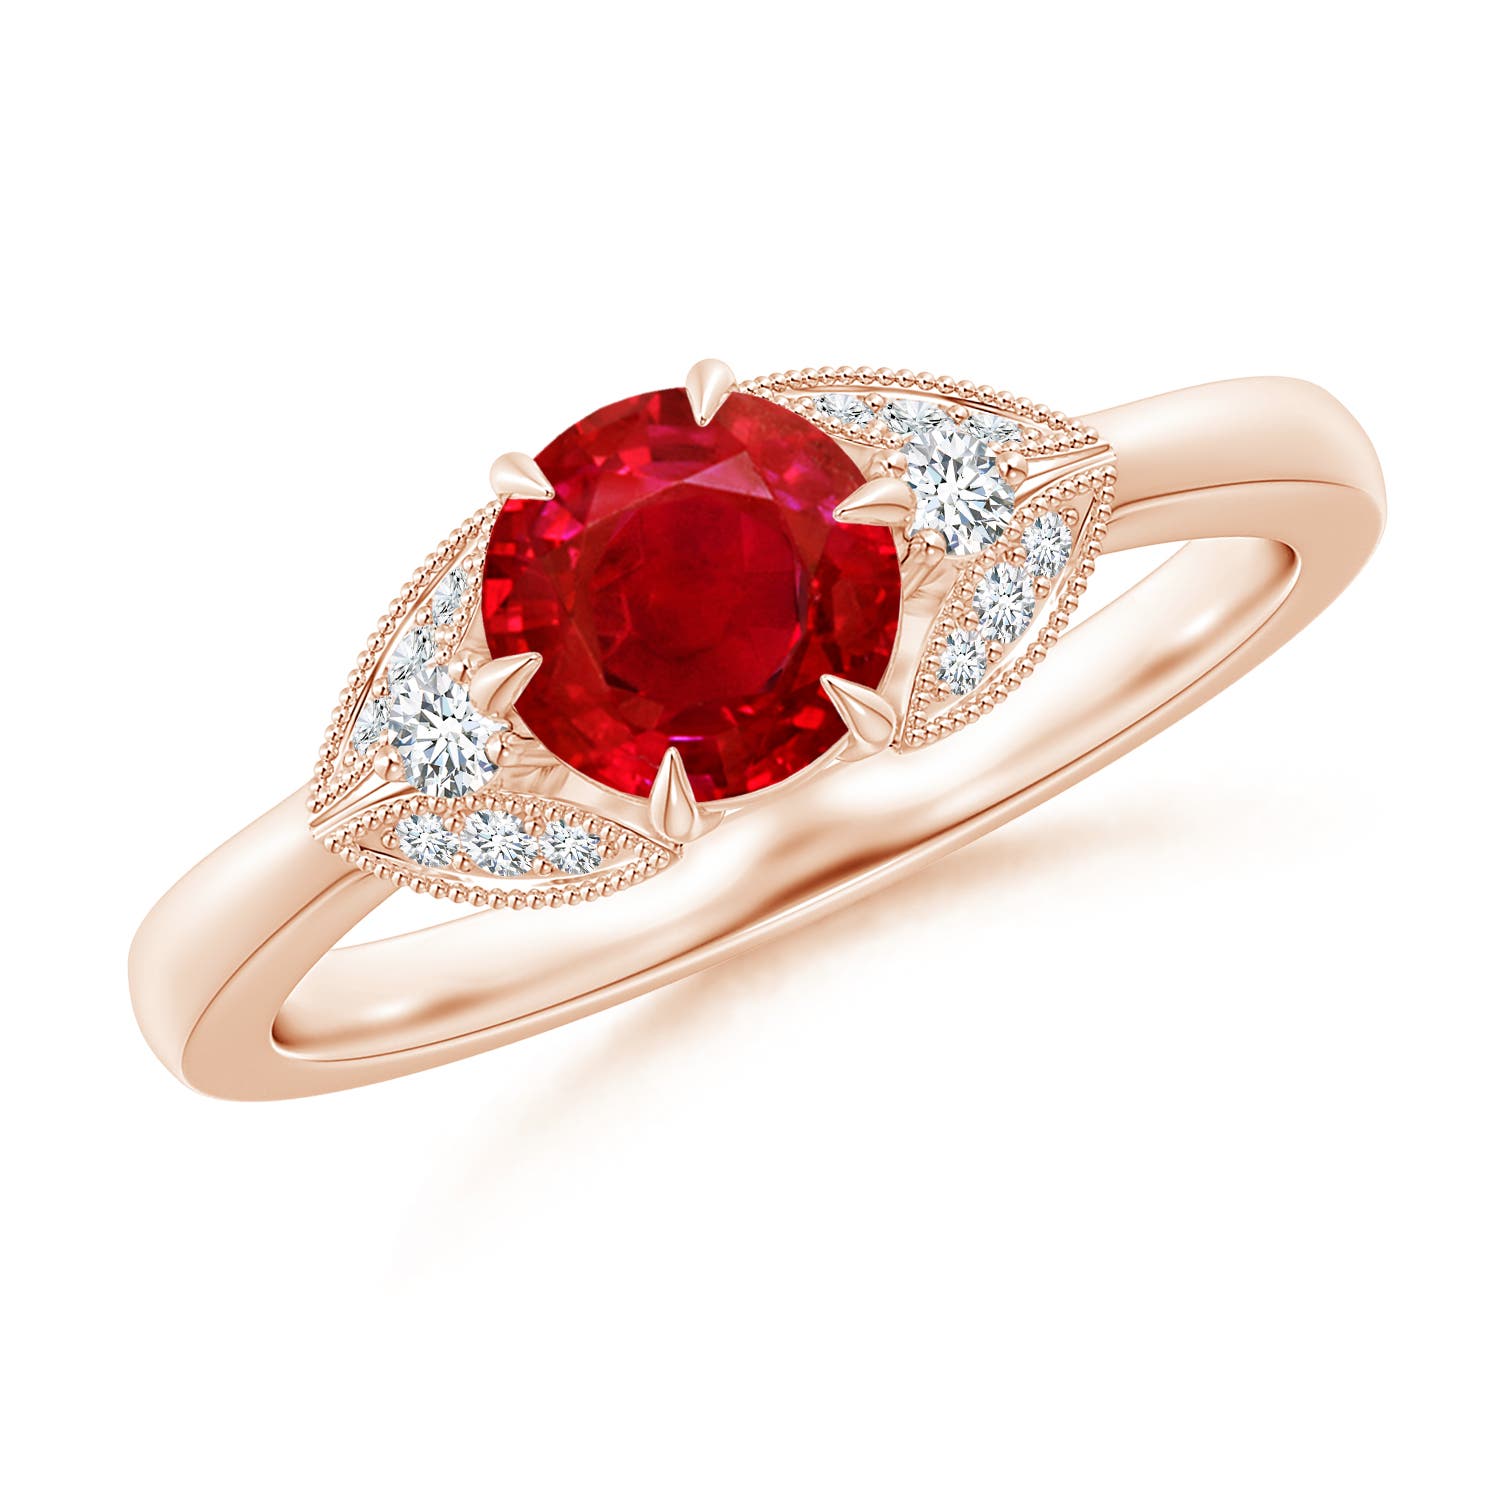 AAA - Ruby / 1.1 CT / 14 KT Rose Gold